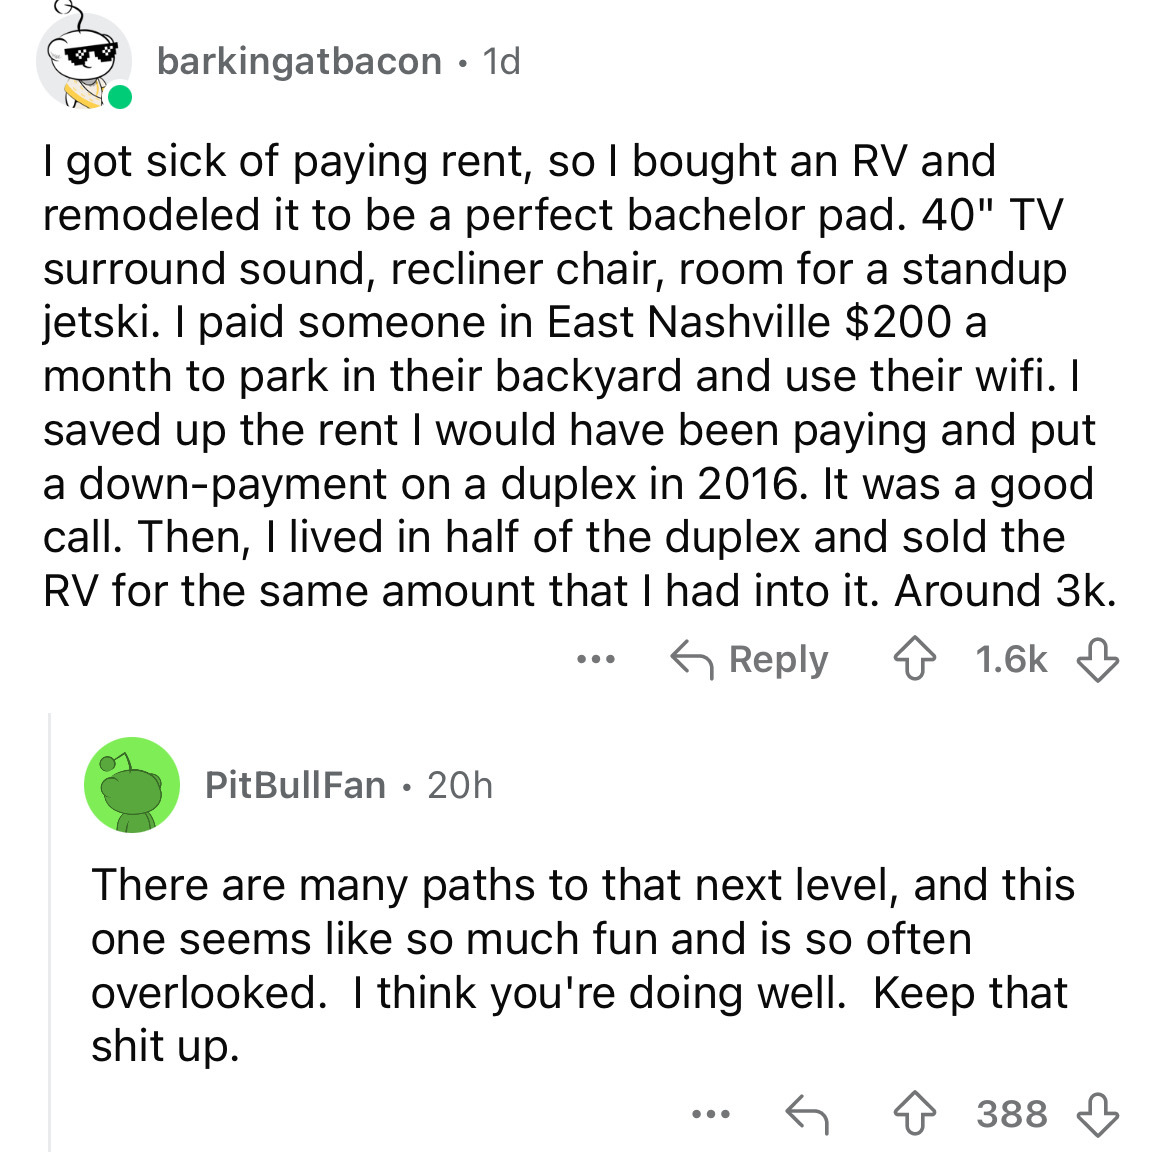 document - barkingatbacon. 1d I got sick of paying rent, so I bought an Rv and remodeled it to be a perfect bachelor pad. 40" Tv surround sound, recliner chair, room for a standup jetski. I paid someone in East Nashville $200 a month to park in their back